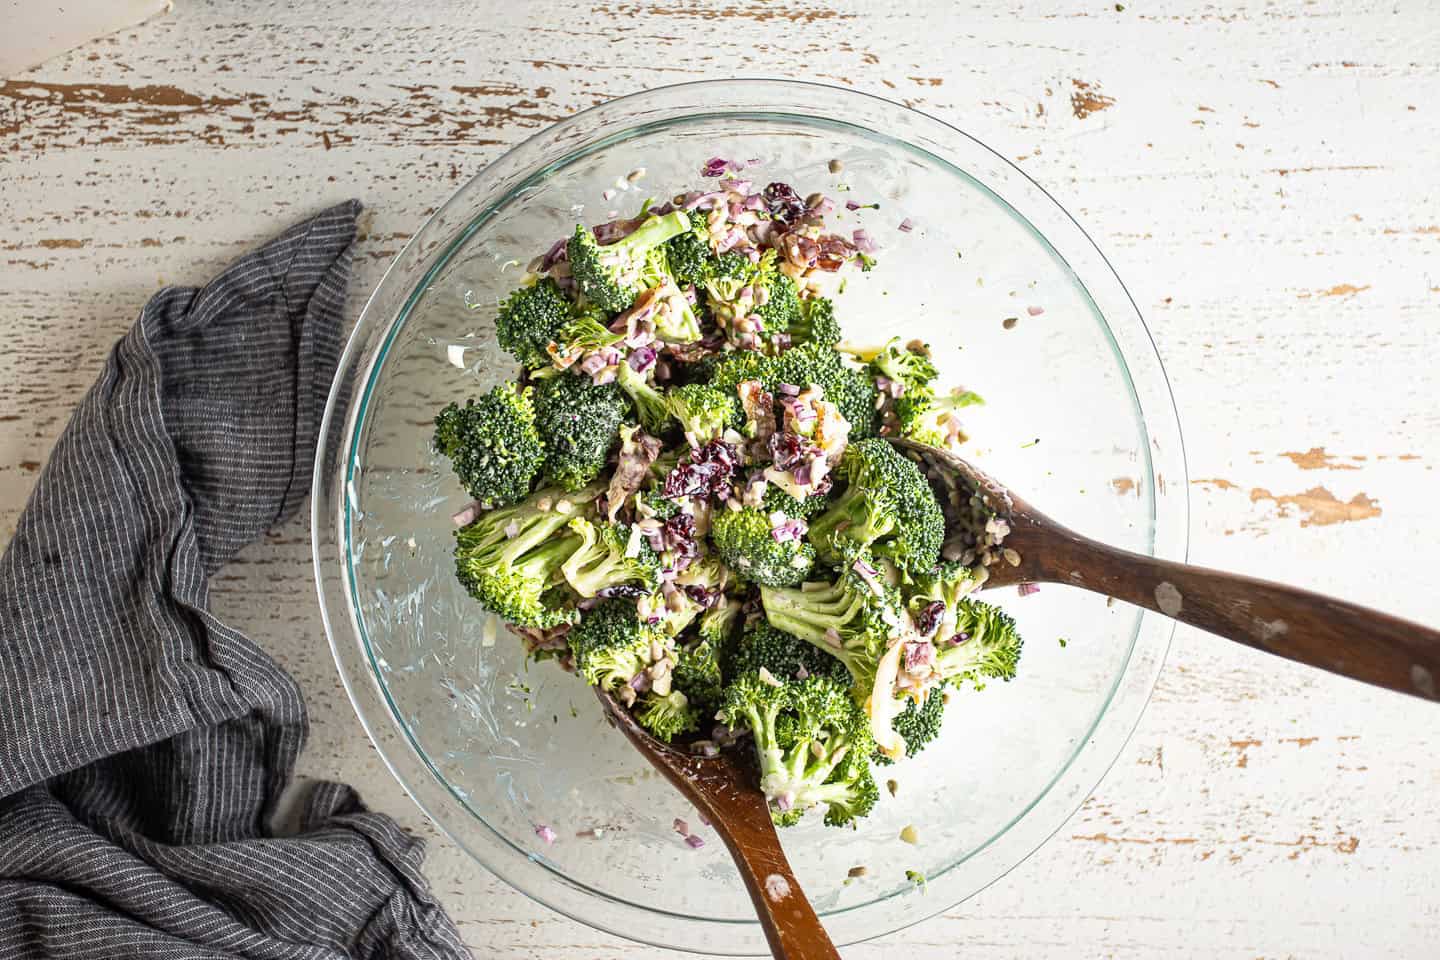 Tossing broccoli salad together to coat in dressing.